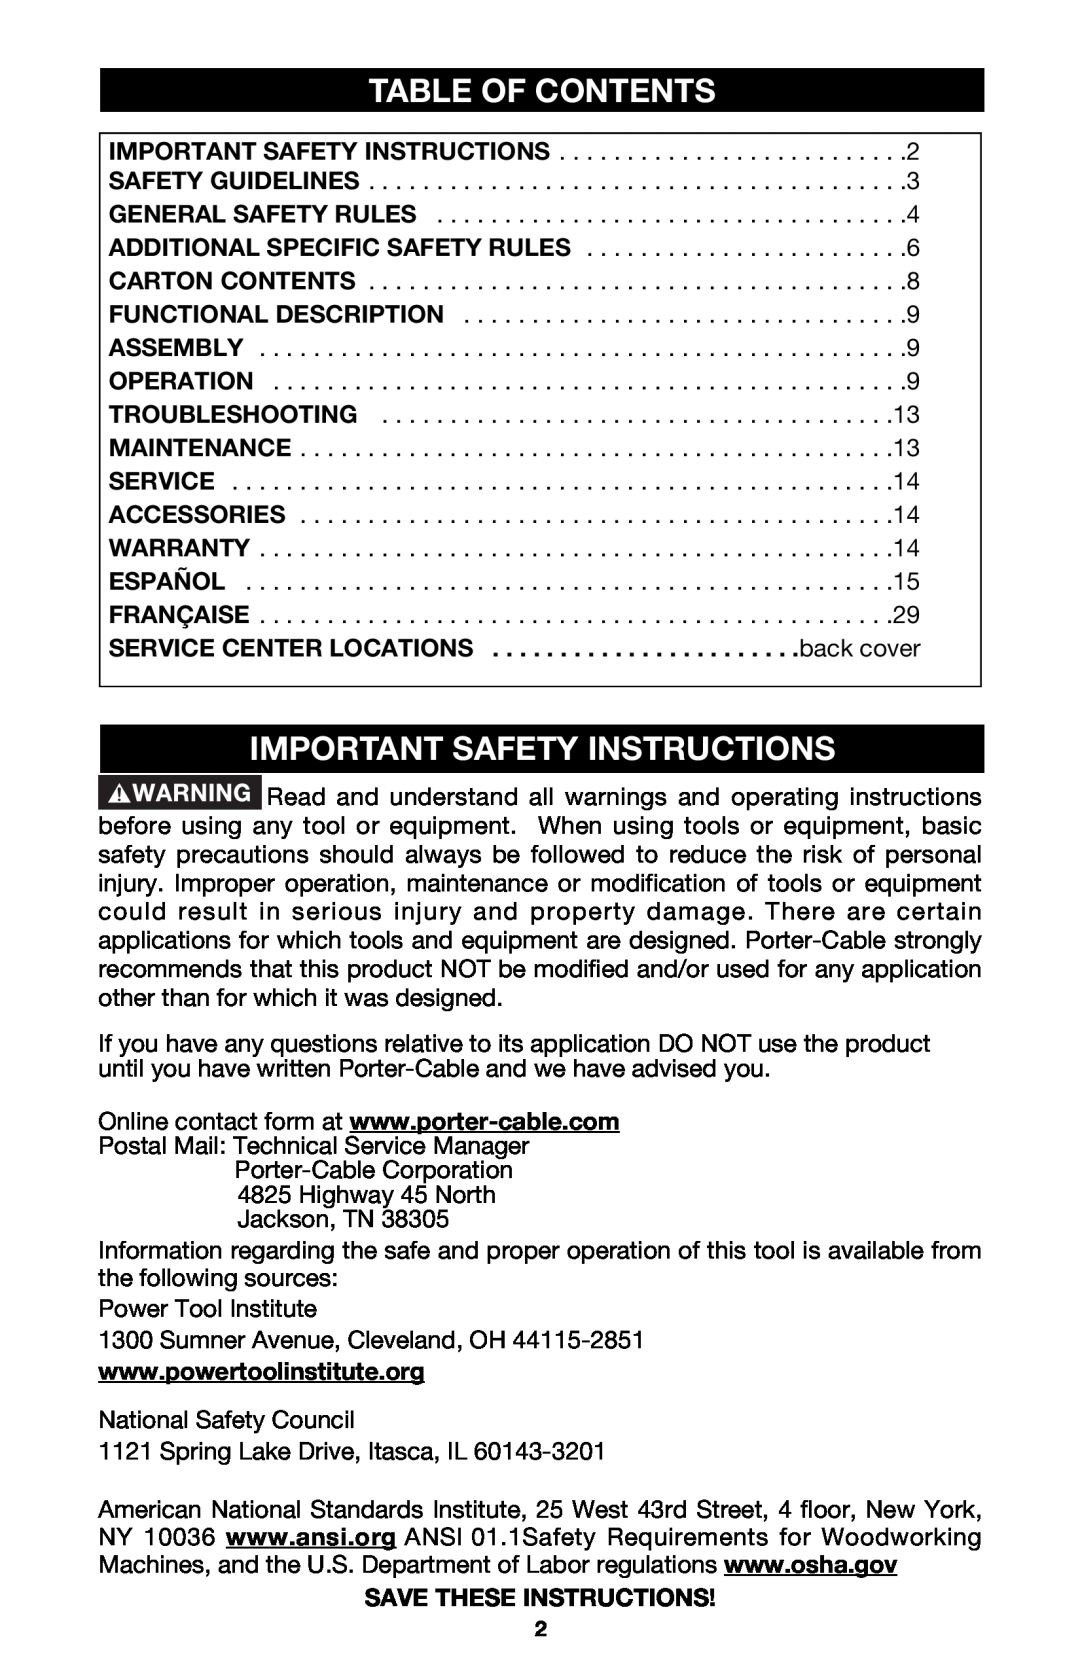 Porter-Cable 6603 instruction manual Table Of Contents, Important Safety Instructions 